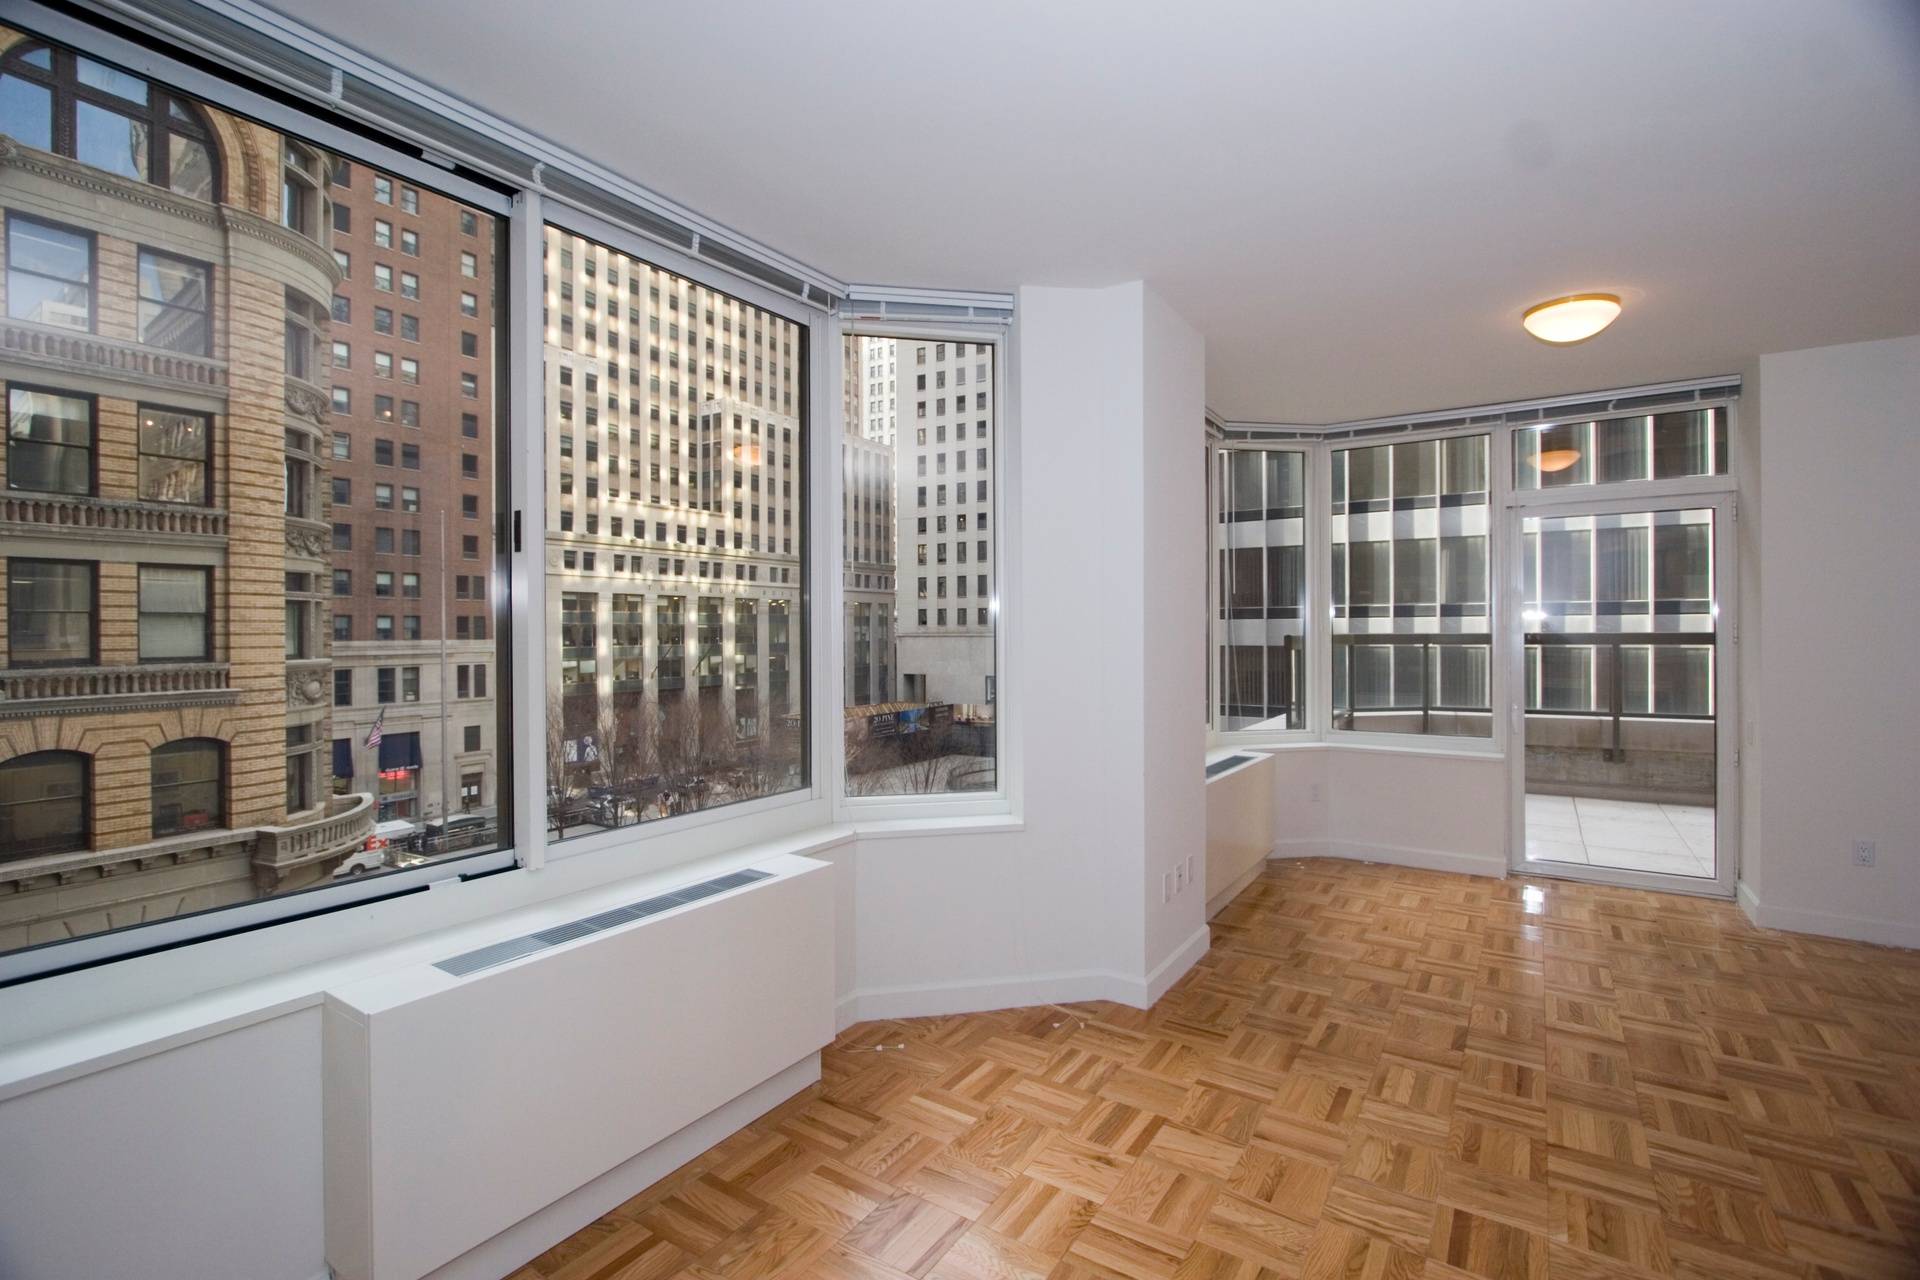 Spectacularly Luxurious 2 Bedroom 2 Bathroom Financial District Apartment